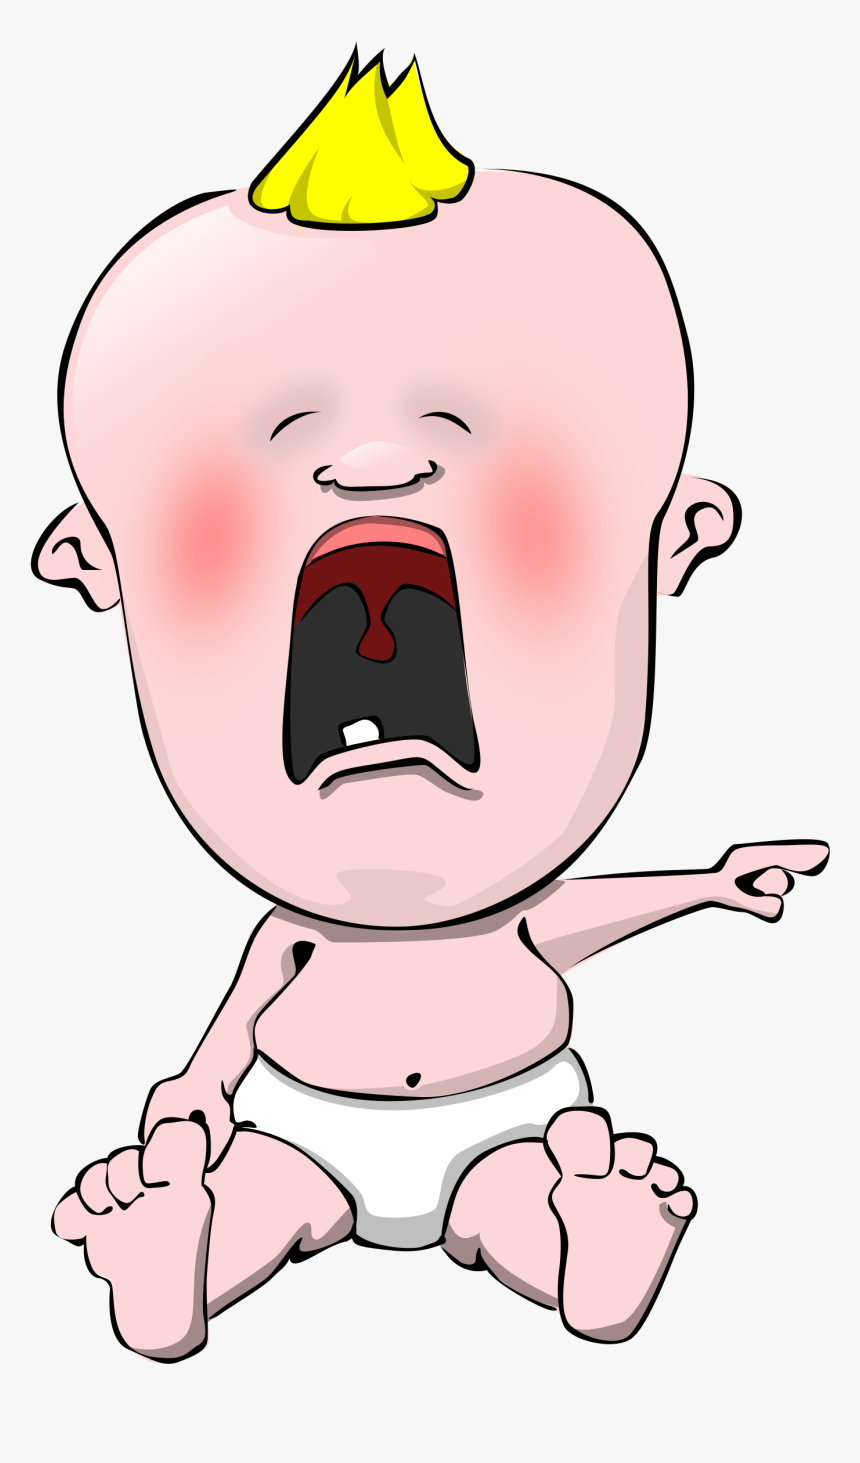 Baby, Crying, Mad, Upset, Infant, Child, Kid, Suckling - Crying Baby Cartoon, HD Png Download, Free Download